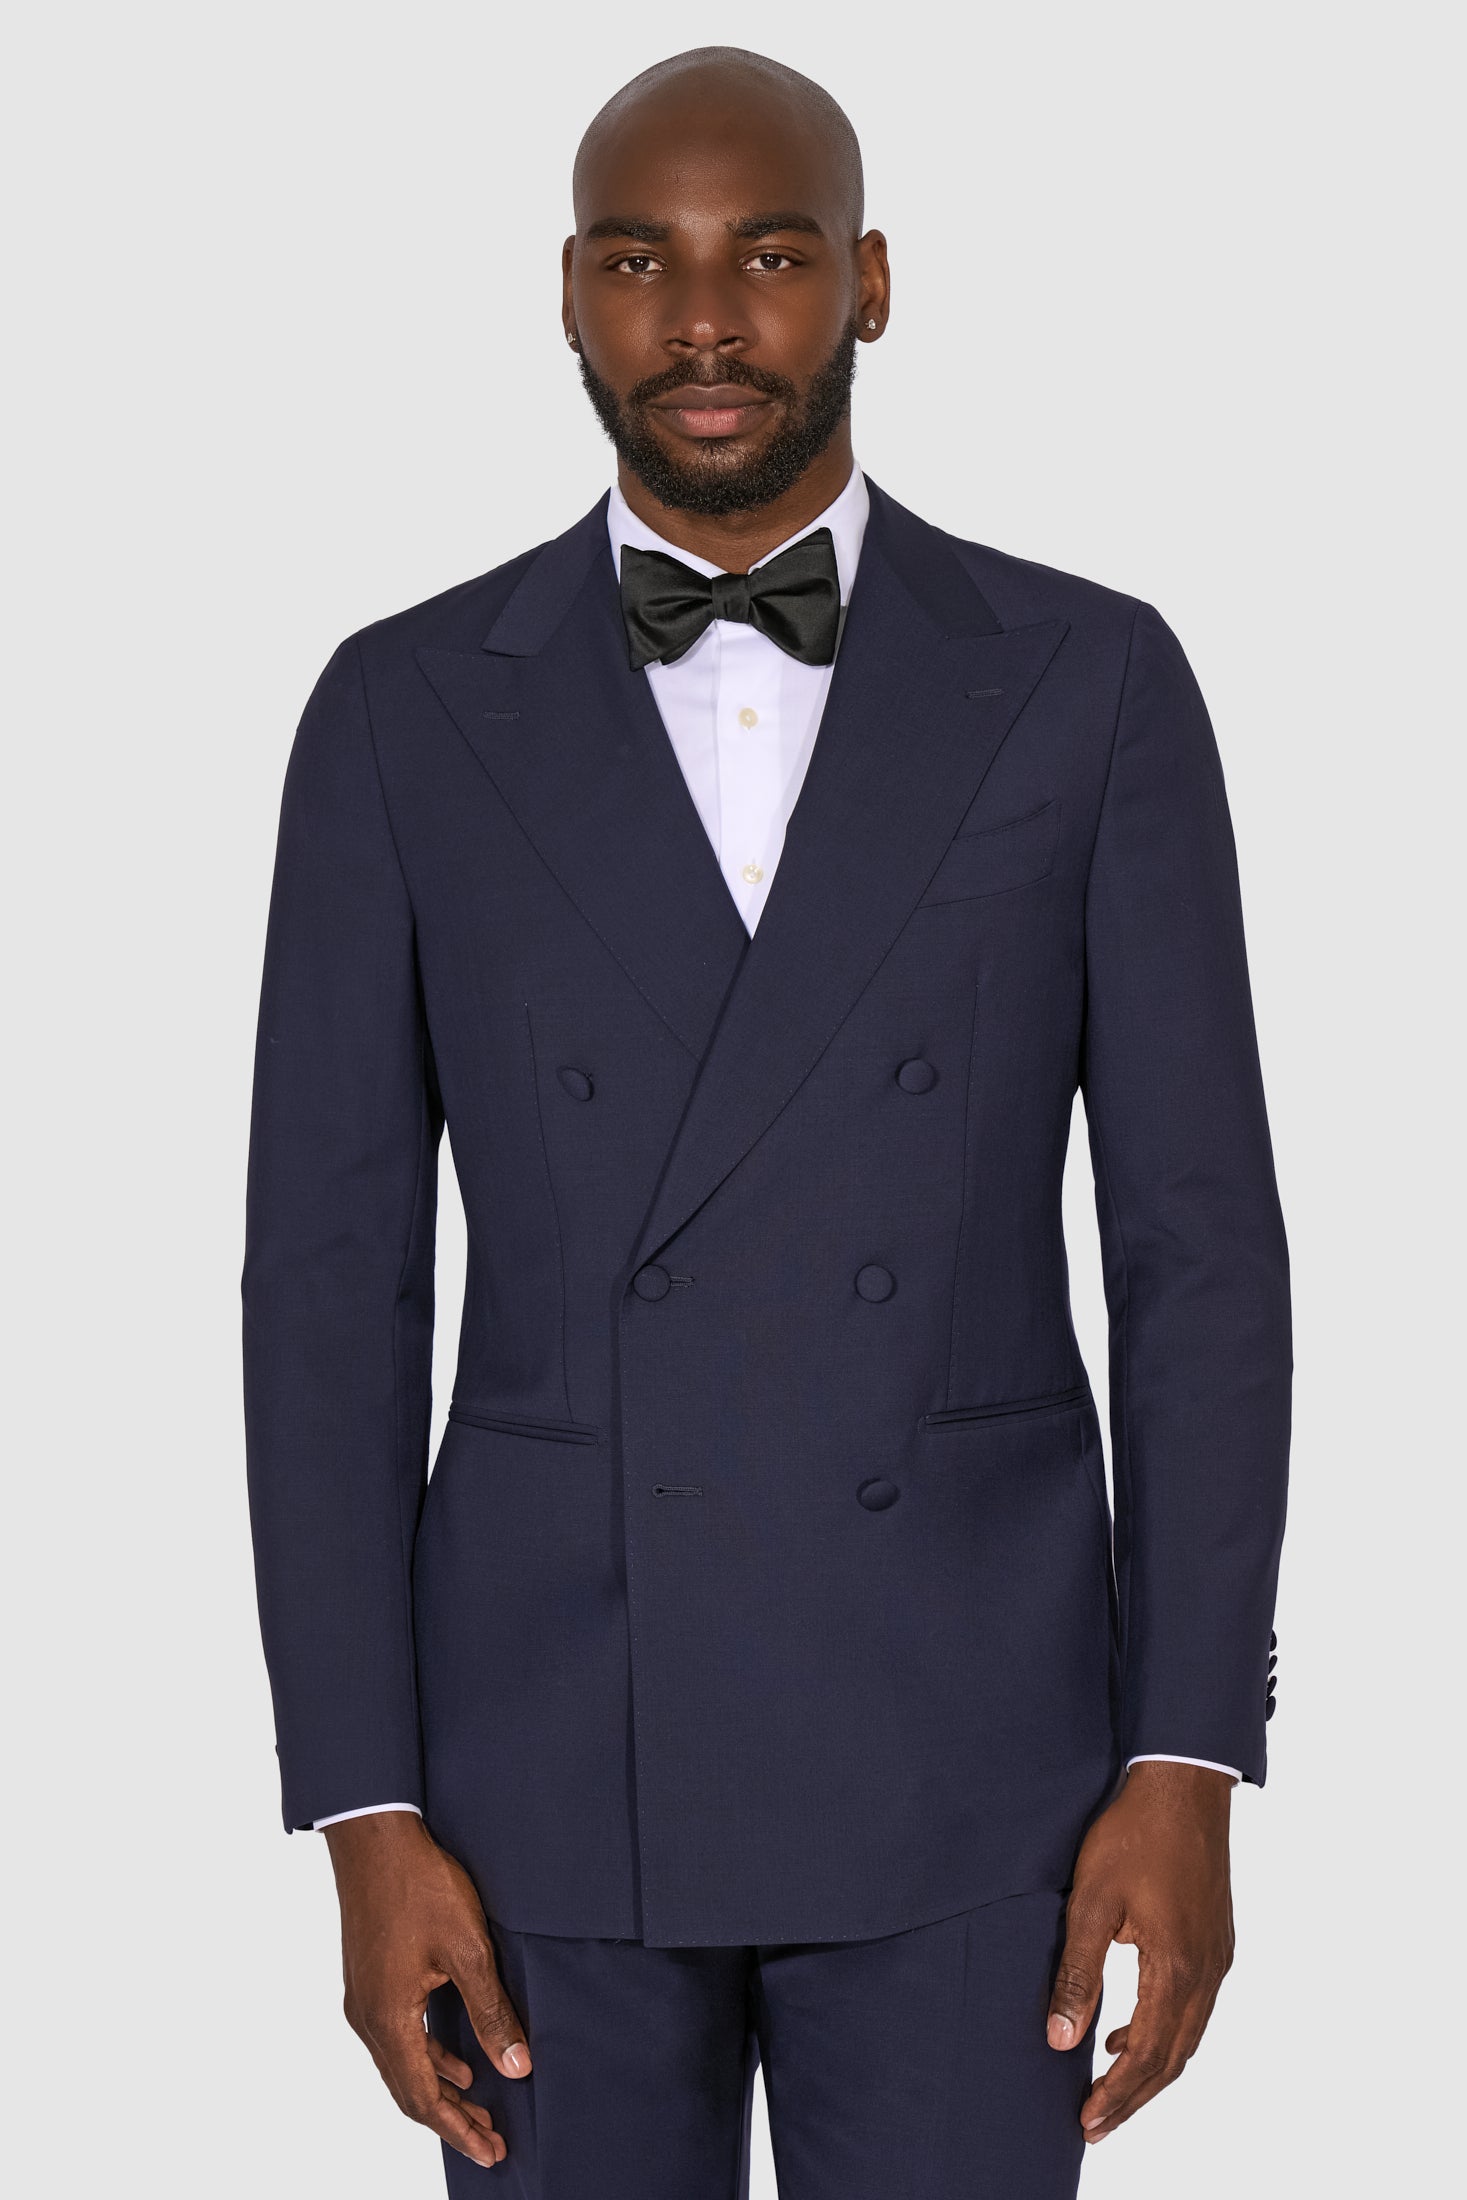 New Suitsupply Havana Navy Blue Wool and Mohair DB Tuxedo - Size 36S, 36R, 42S, 42R, 42L, 44S, 44R